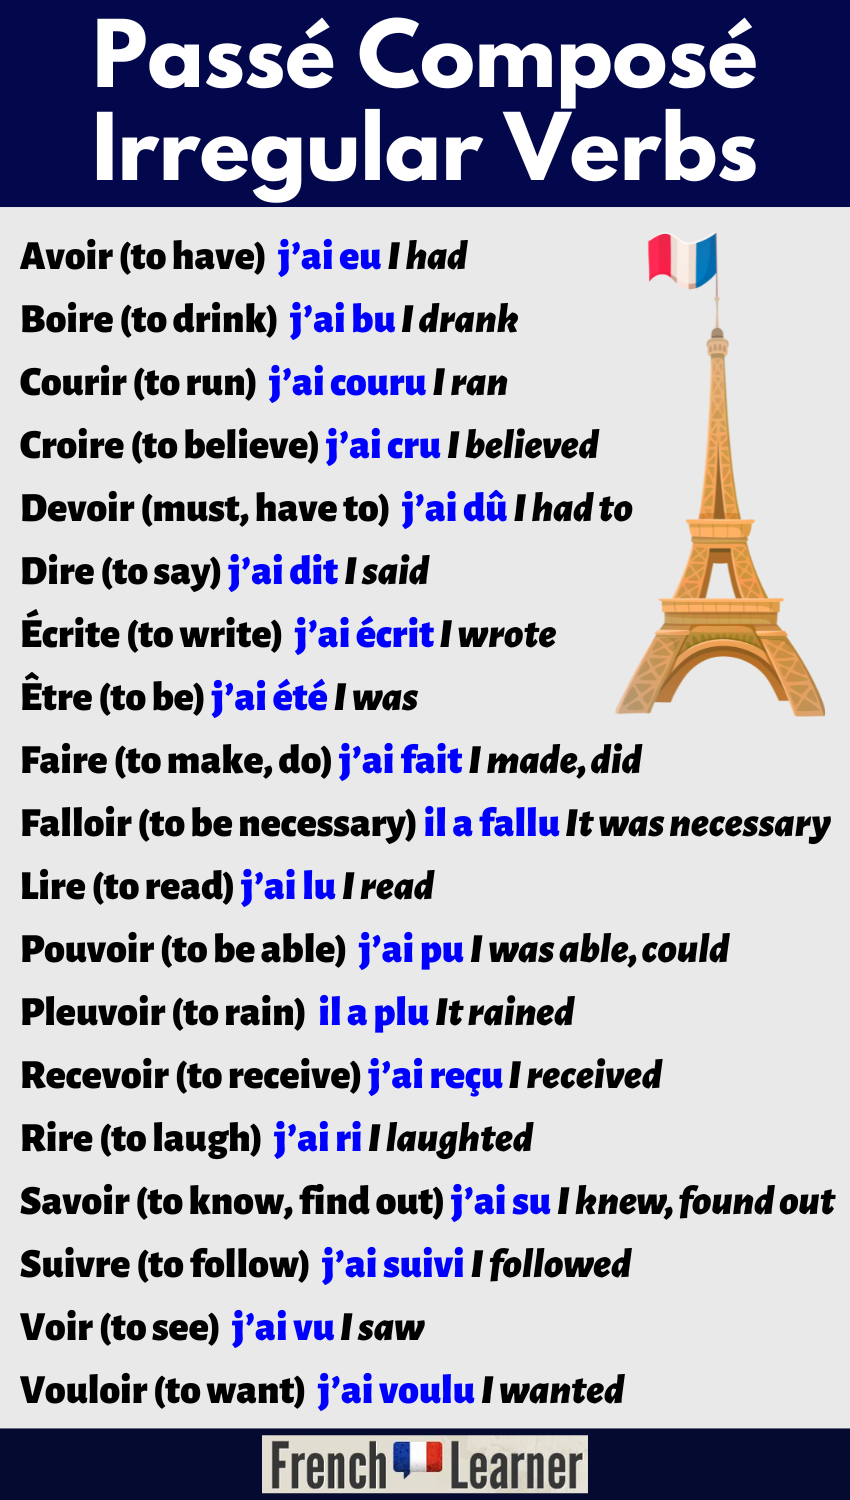 passe-compose-irregular-verbs-frenchlearner